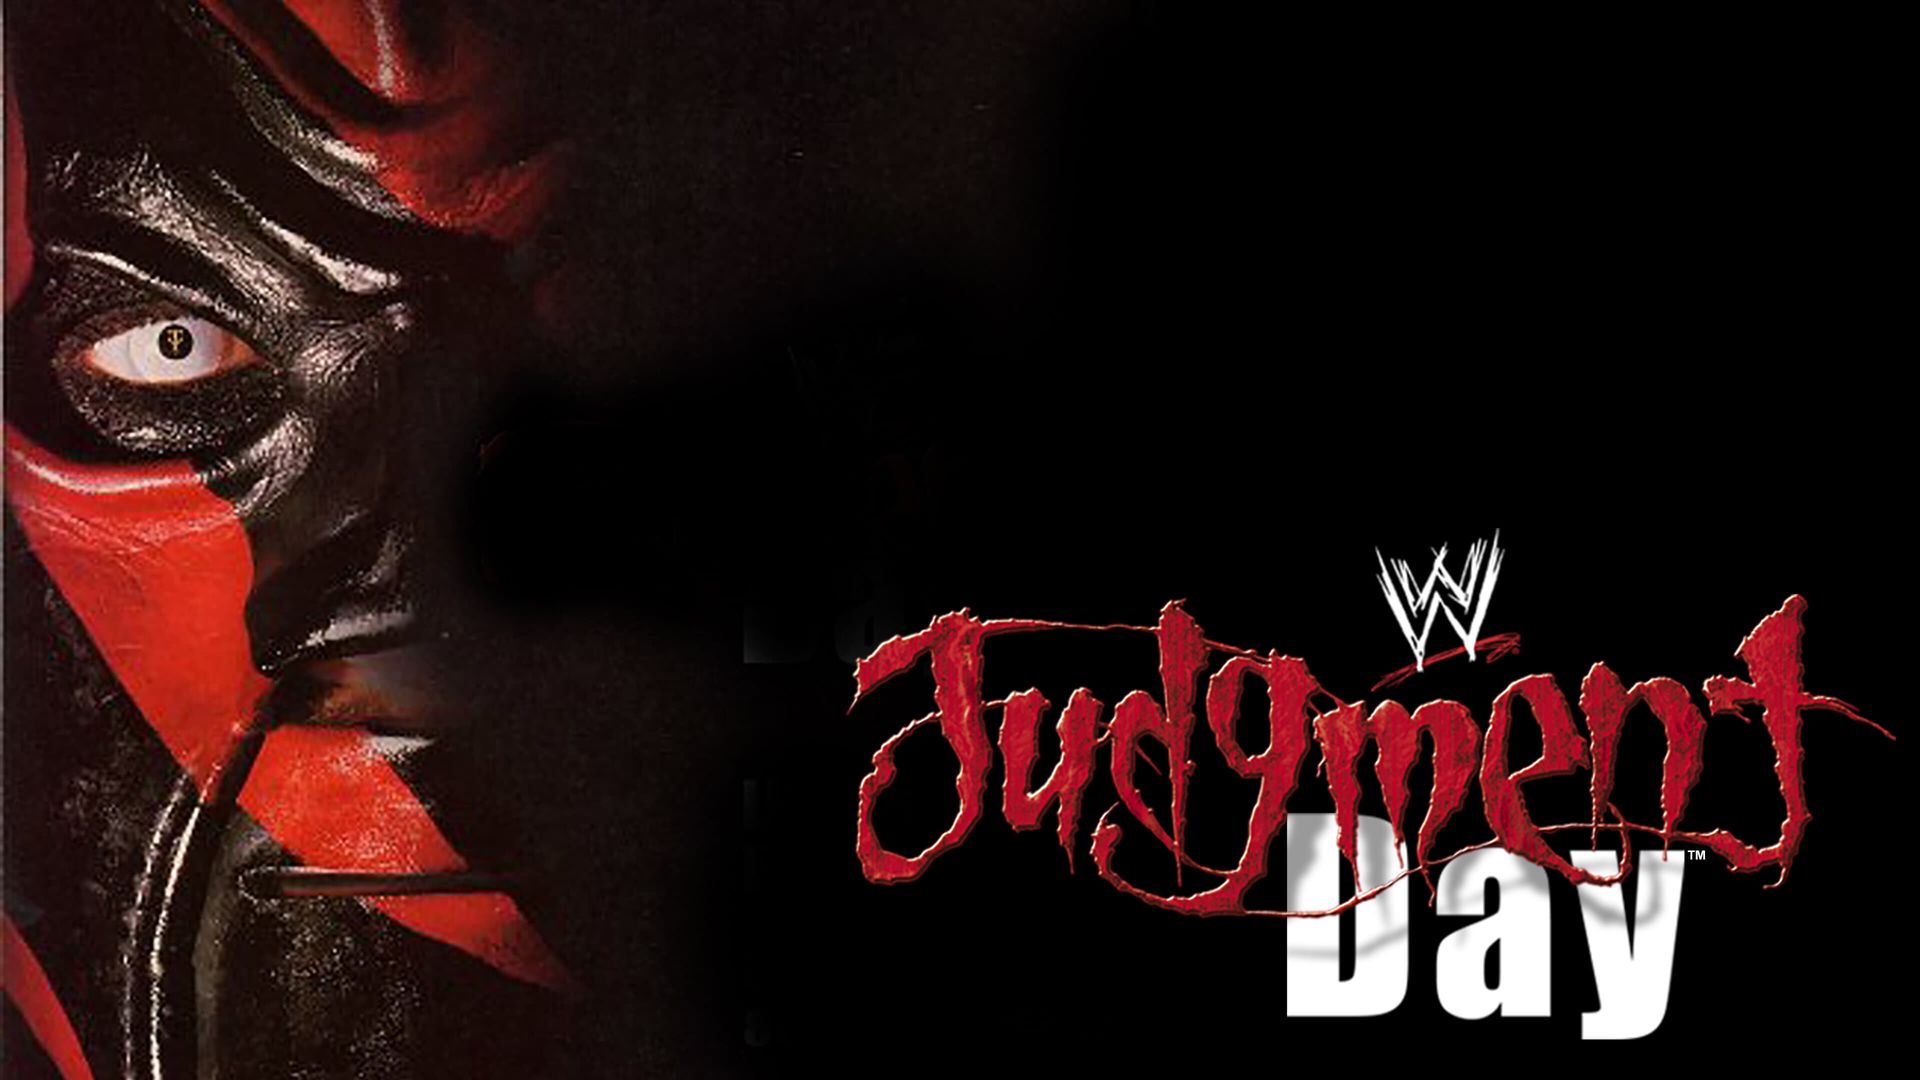 WWF Judgment Day background